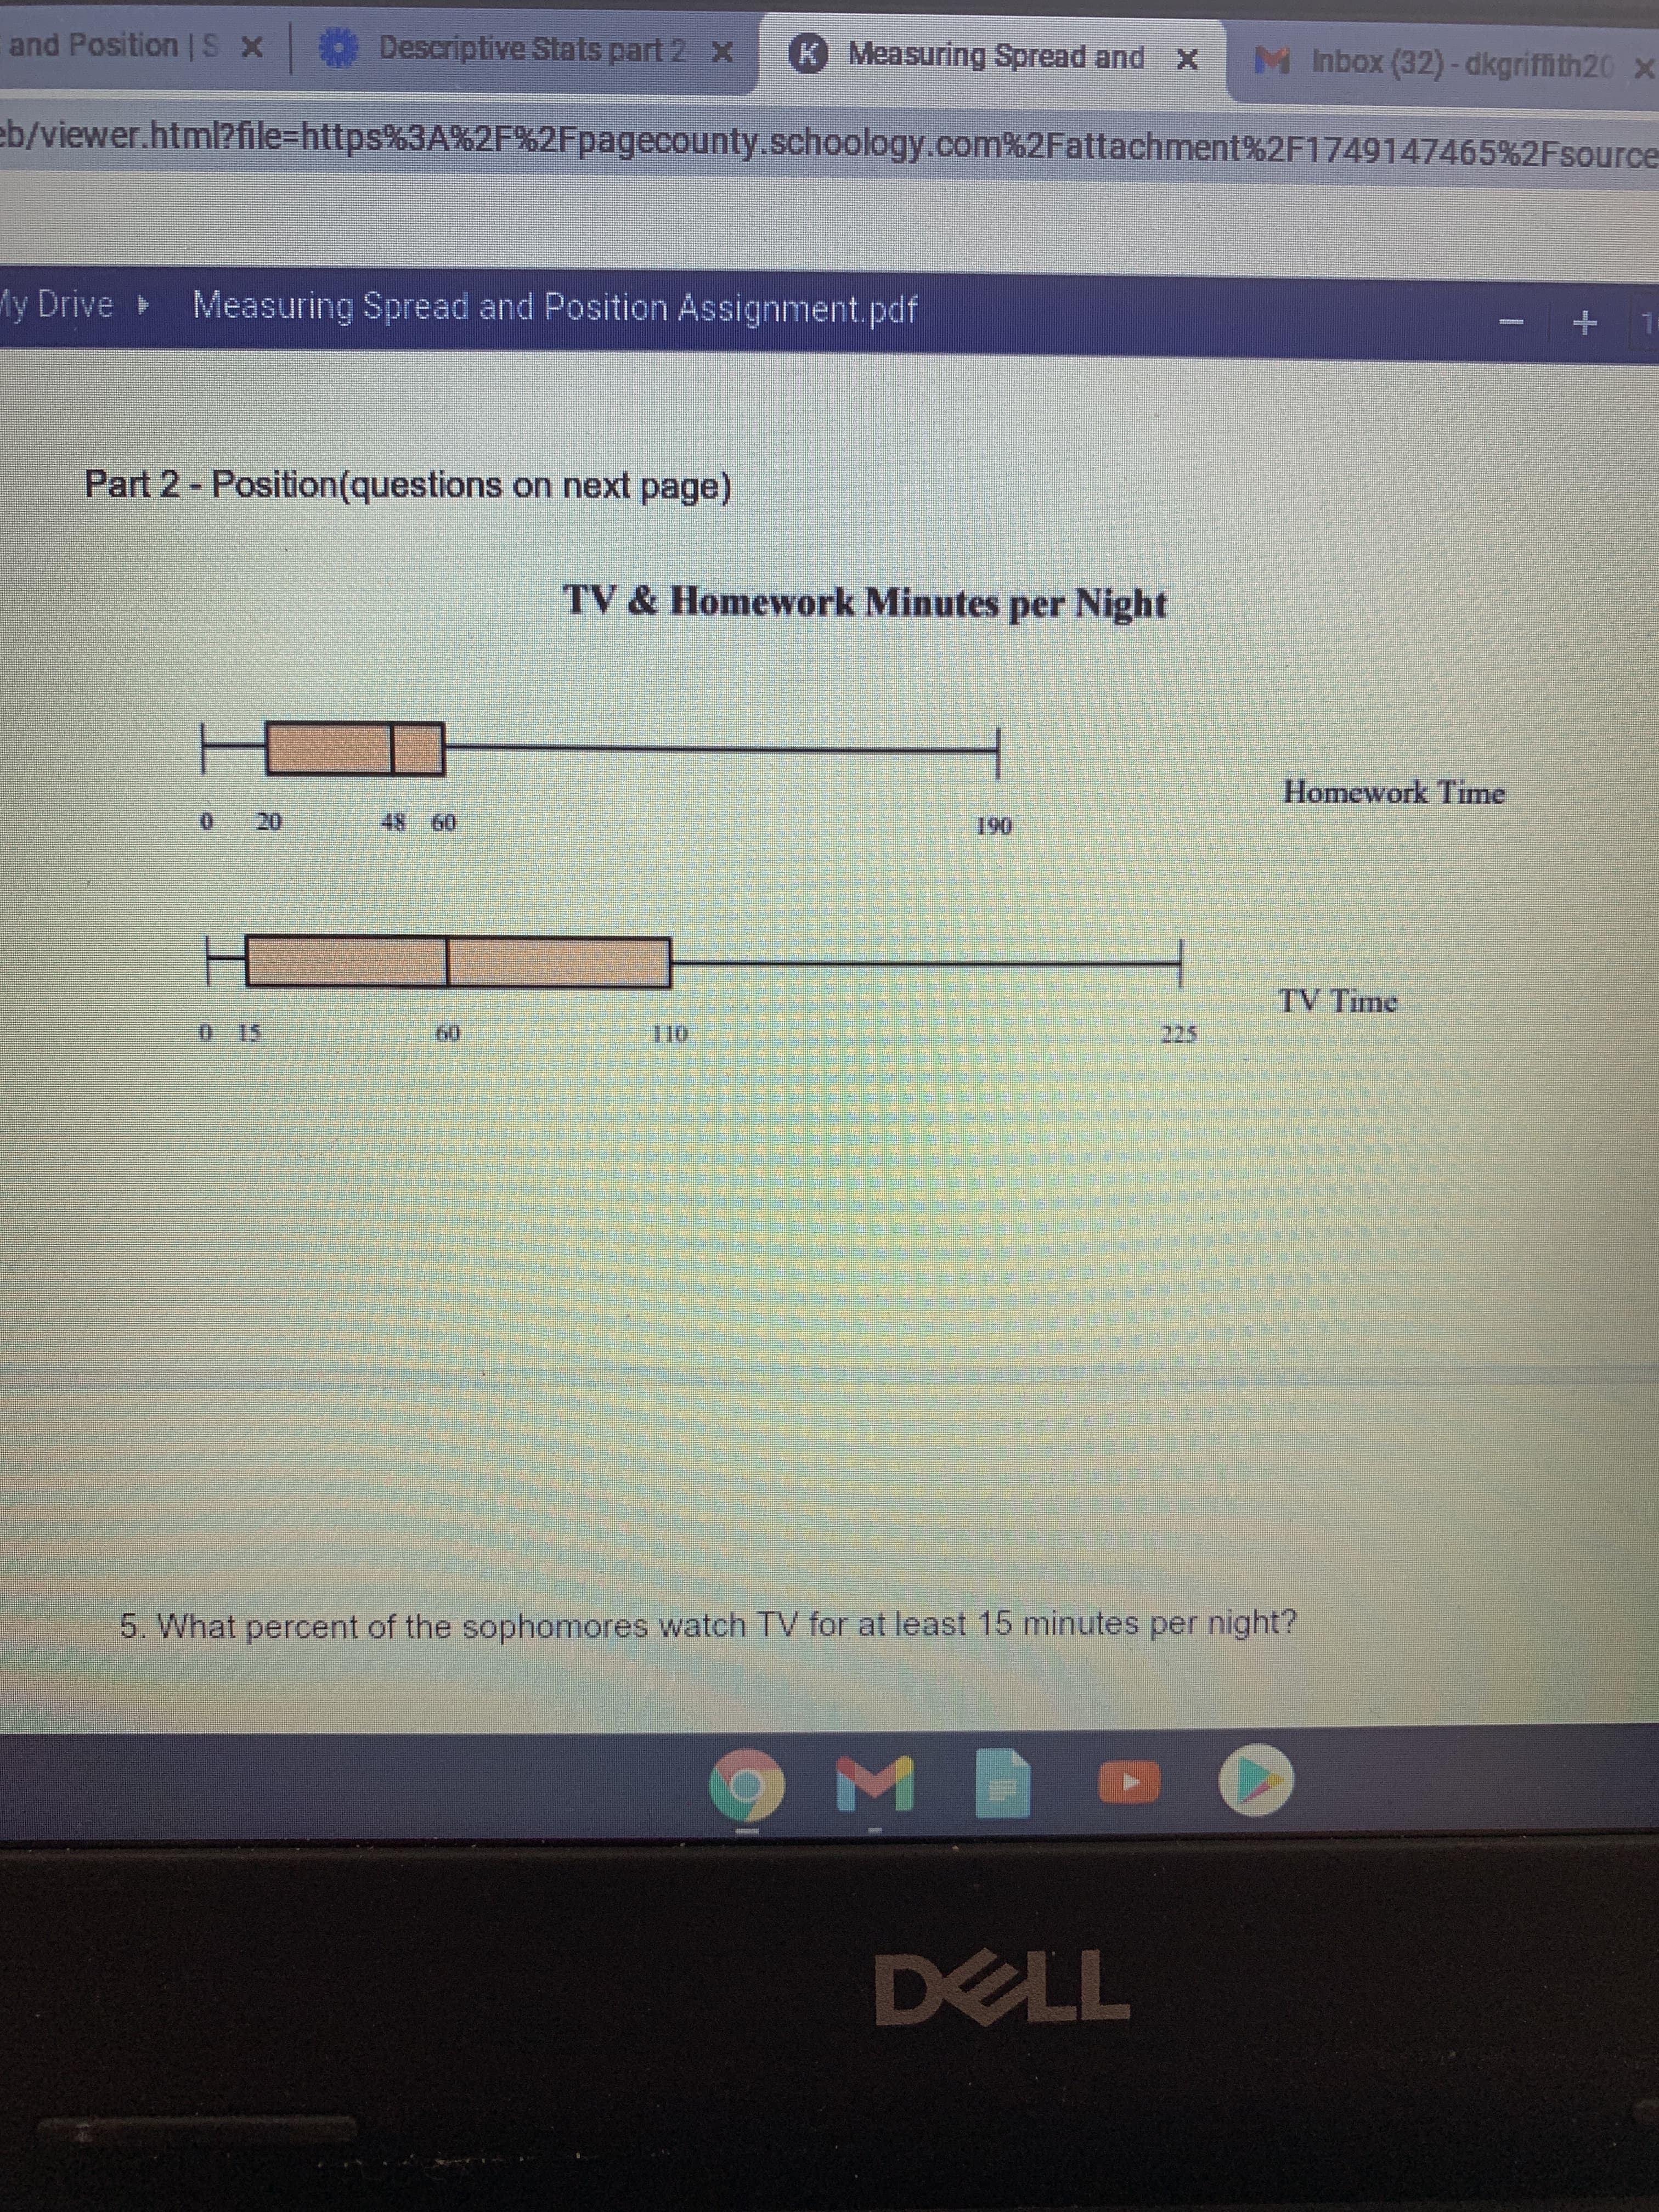 5. What percent of the sophomores watch TV for at least 15 minutes per night?
